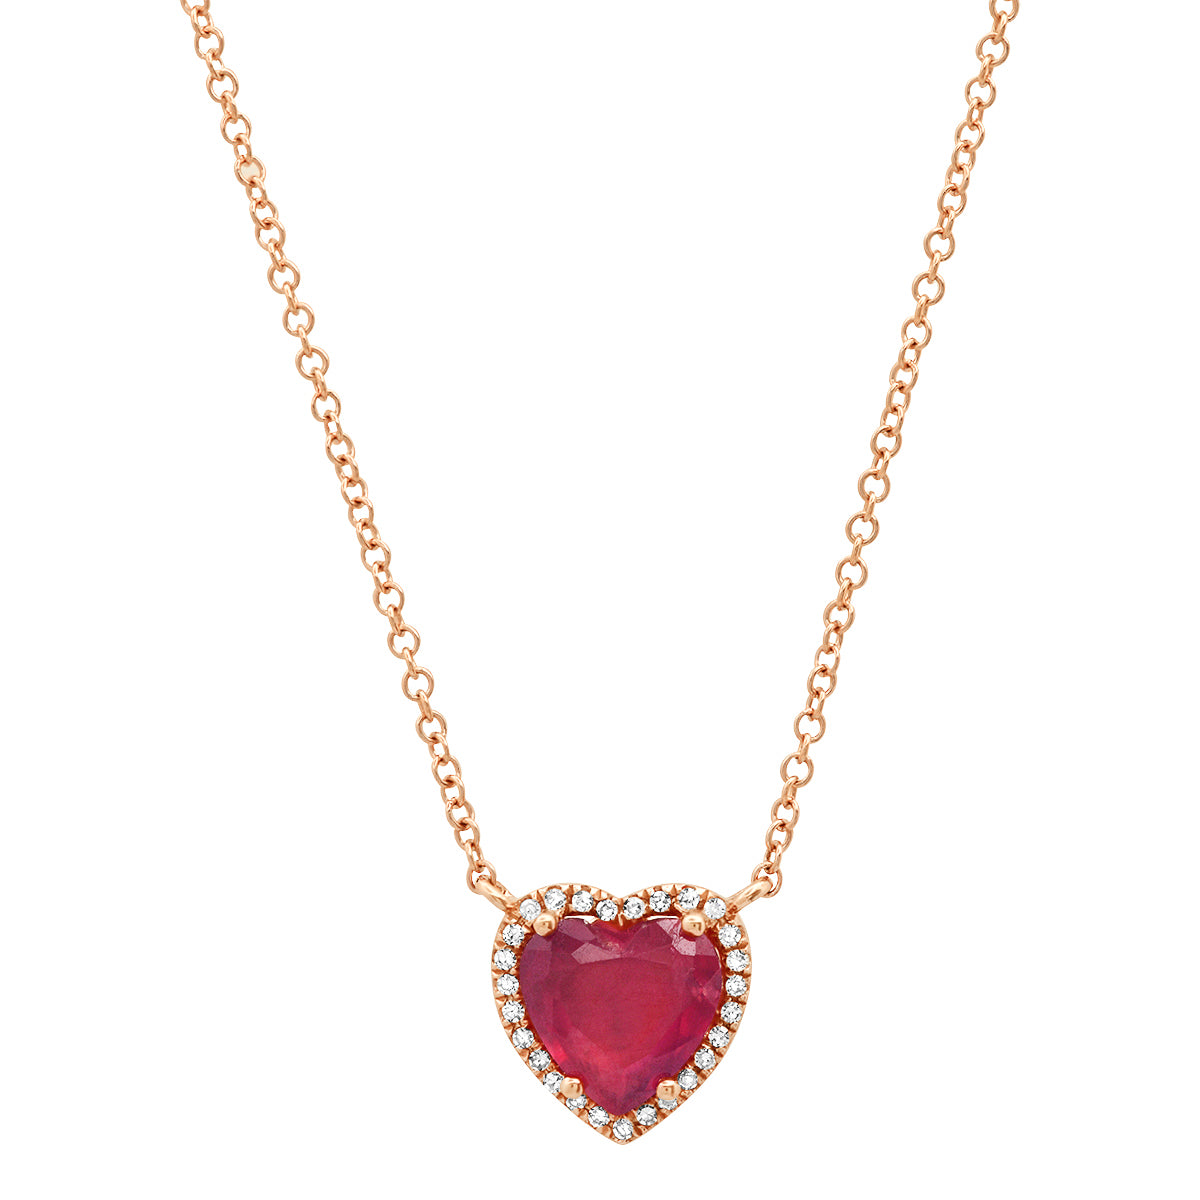 Gemstone Heart with Diamond Halo on Thin Cable Chain Necklace